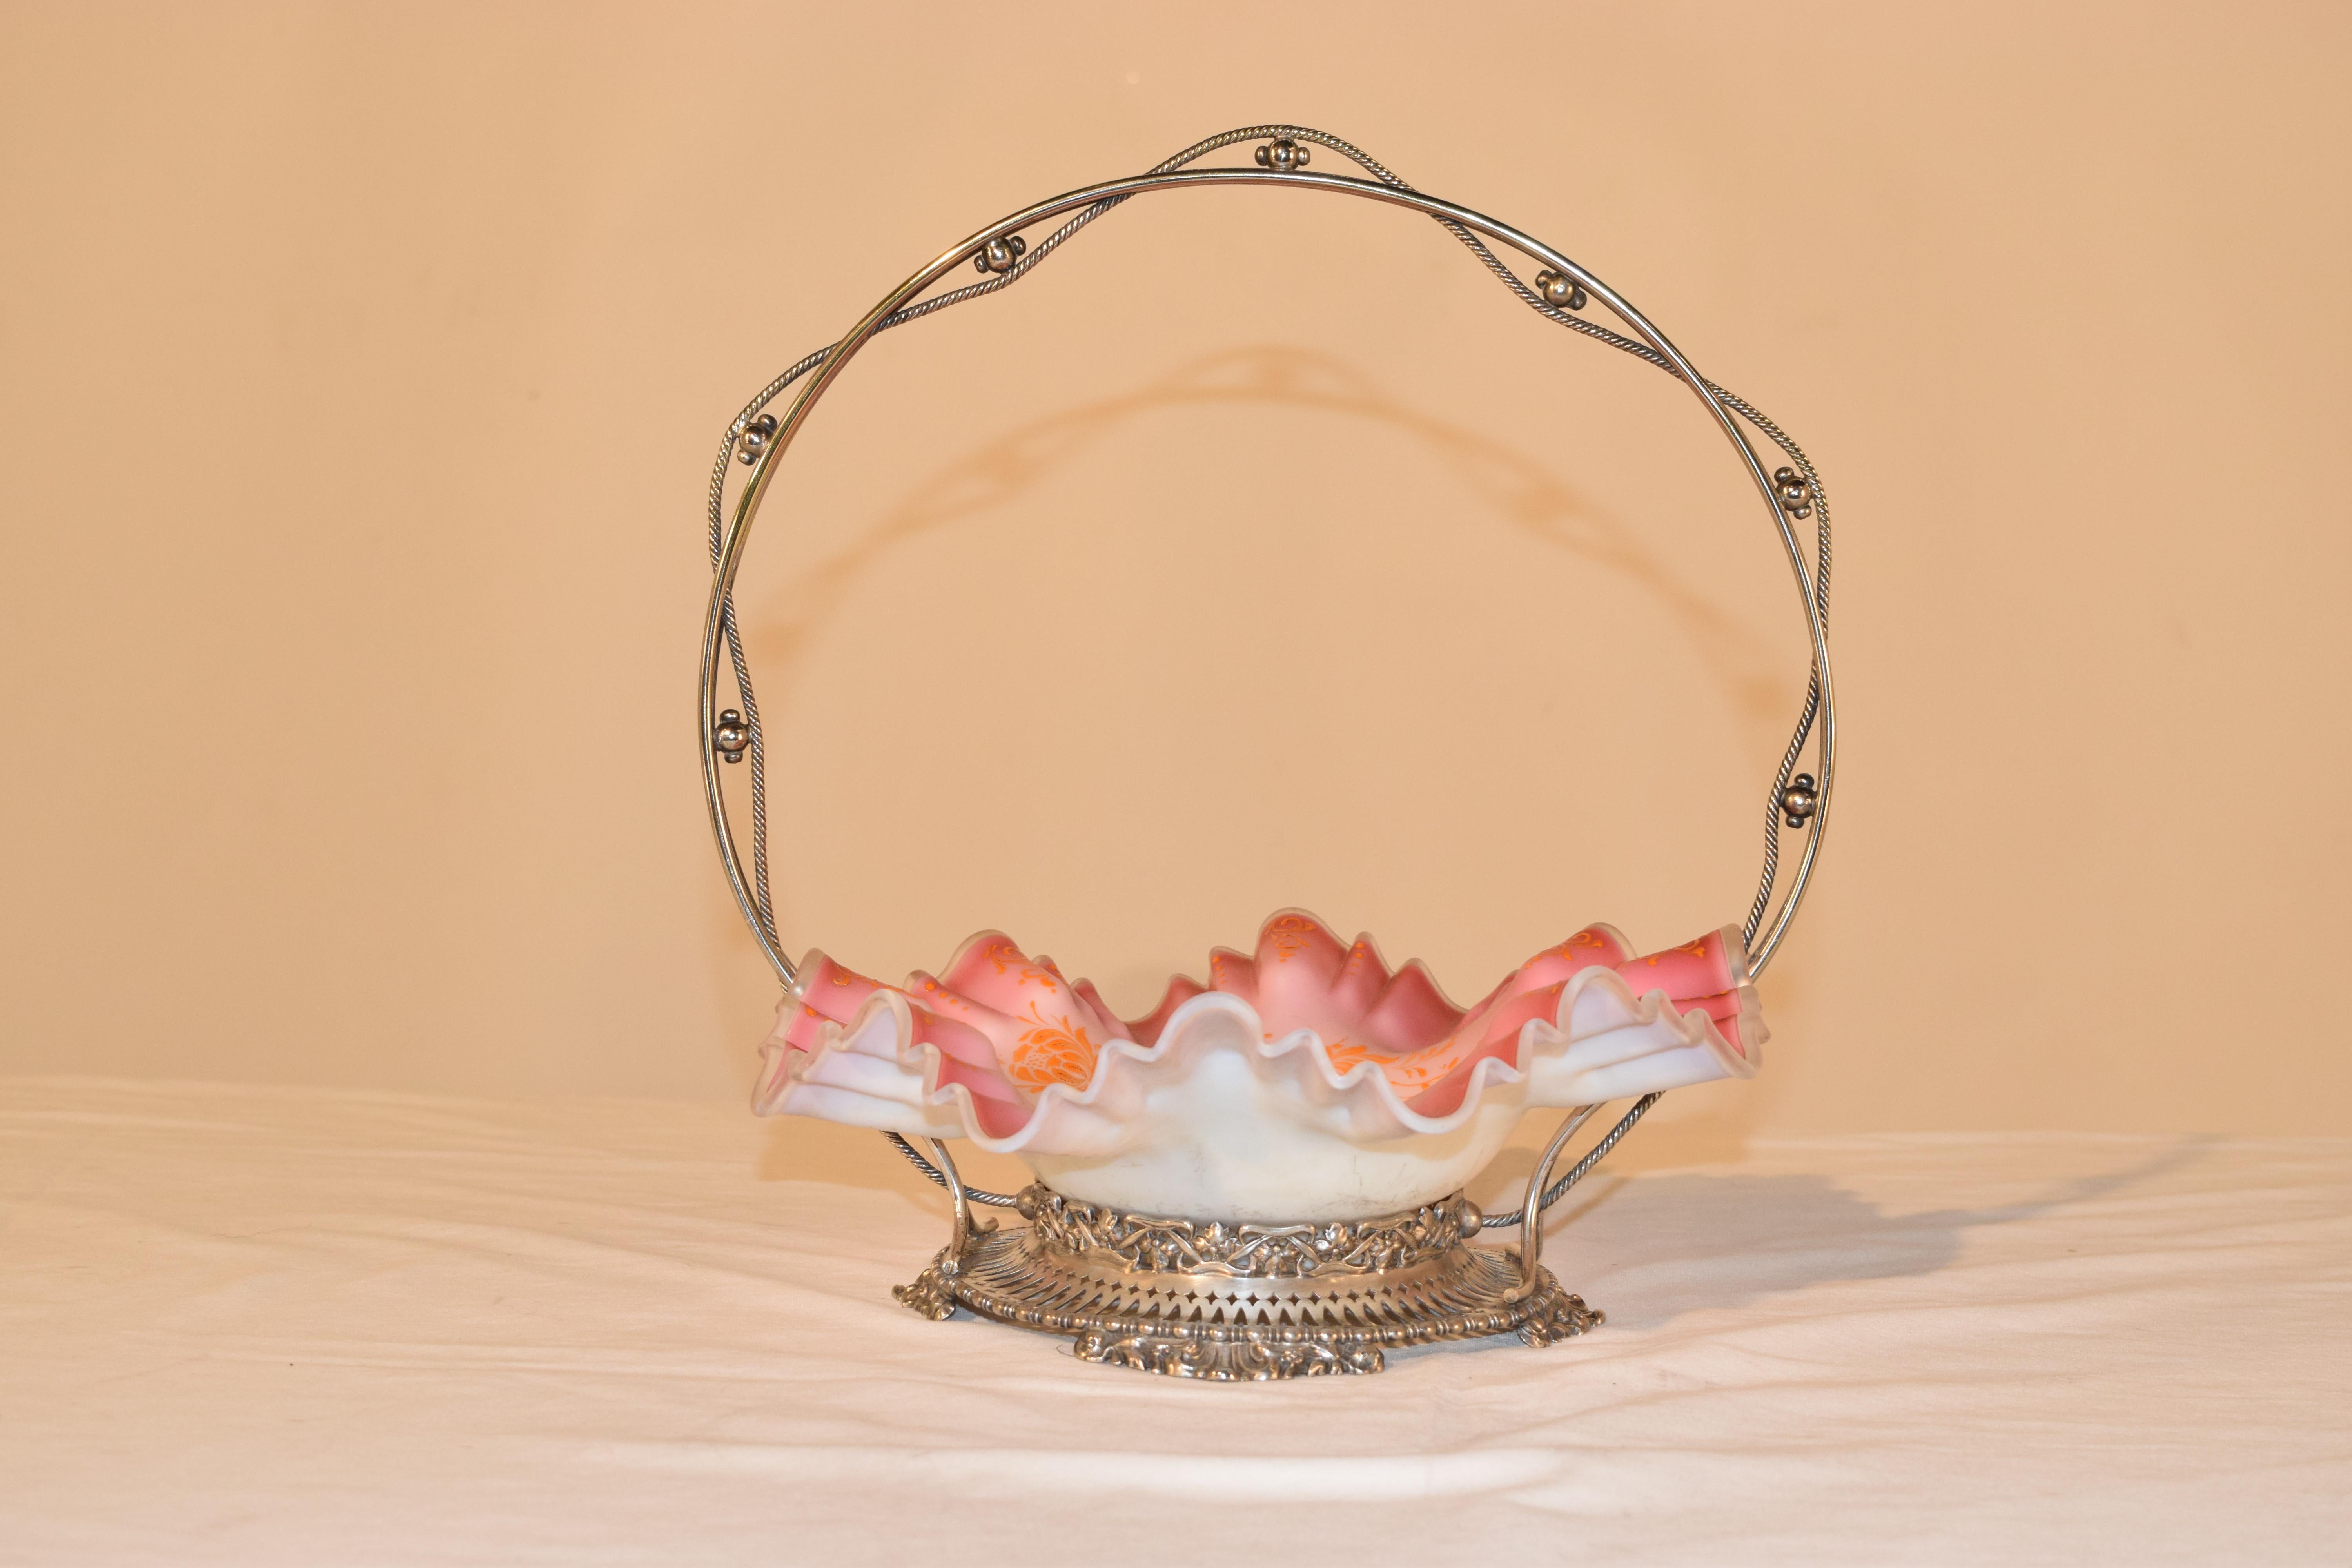 Late 19th century art glass cased bridal basket with pink and white satin glass bowl, which is shaped and fluted around the edge and is hand painted with orange florals. The bowl has a silver plate surround which is pierced around the base and a